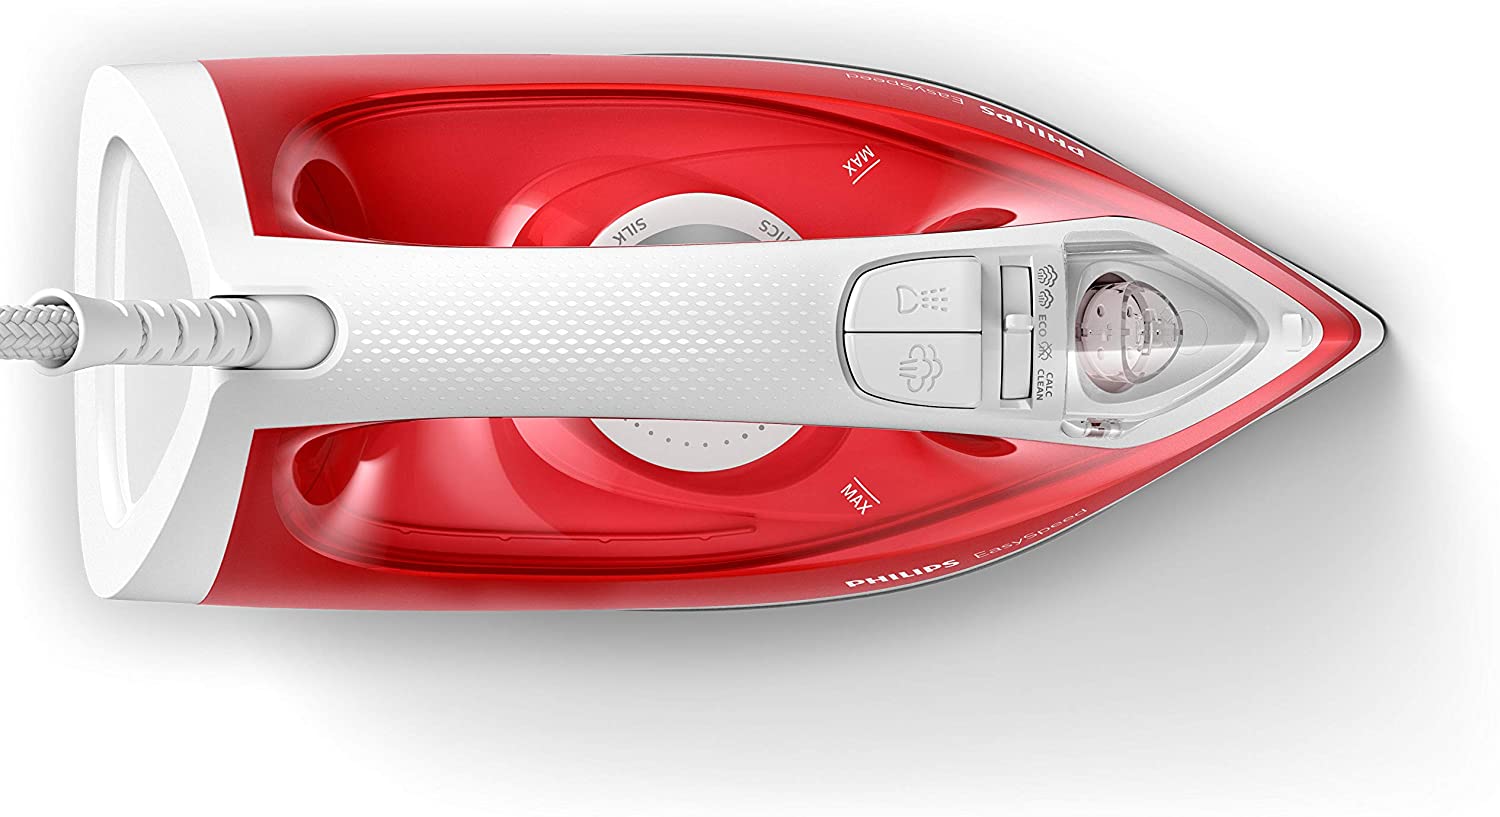 Philips Easy Speed iron Dry & Steam - GC1742 | reliable performance | lightweight | variable steam settings | safety features | stylish | even heat distribution | Halabh.com